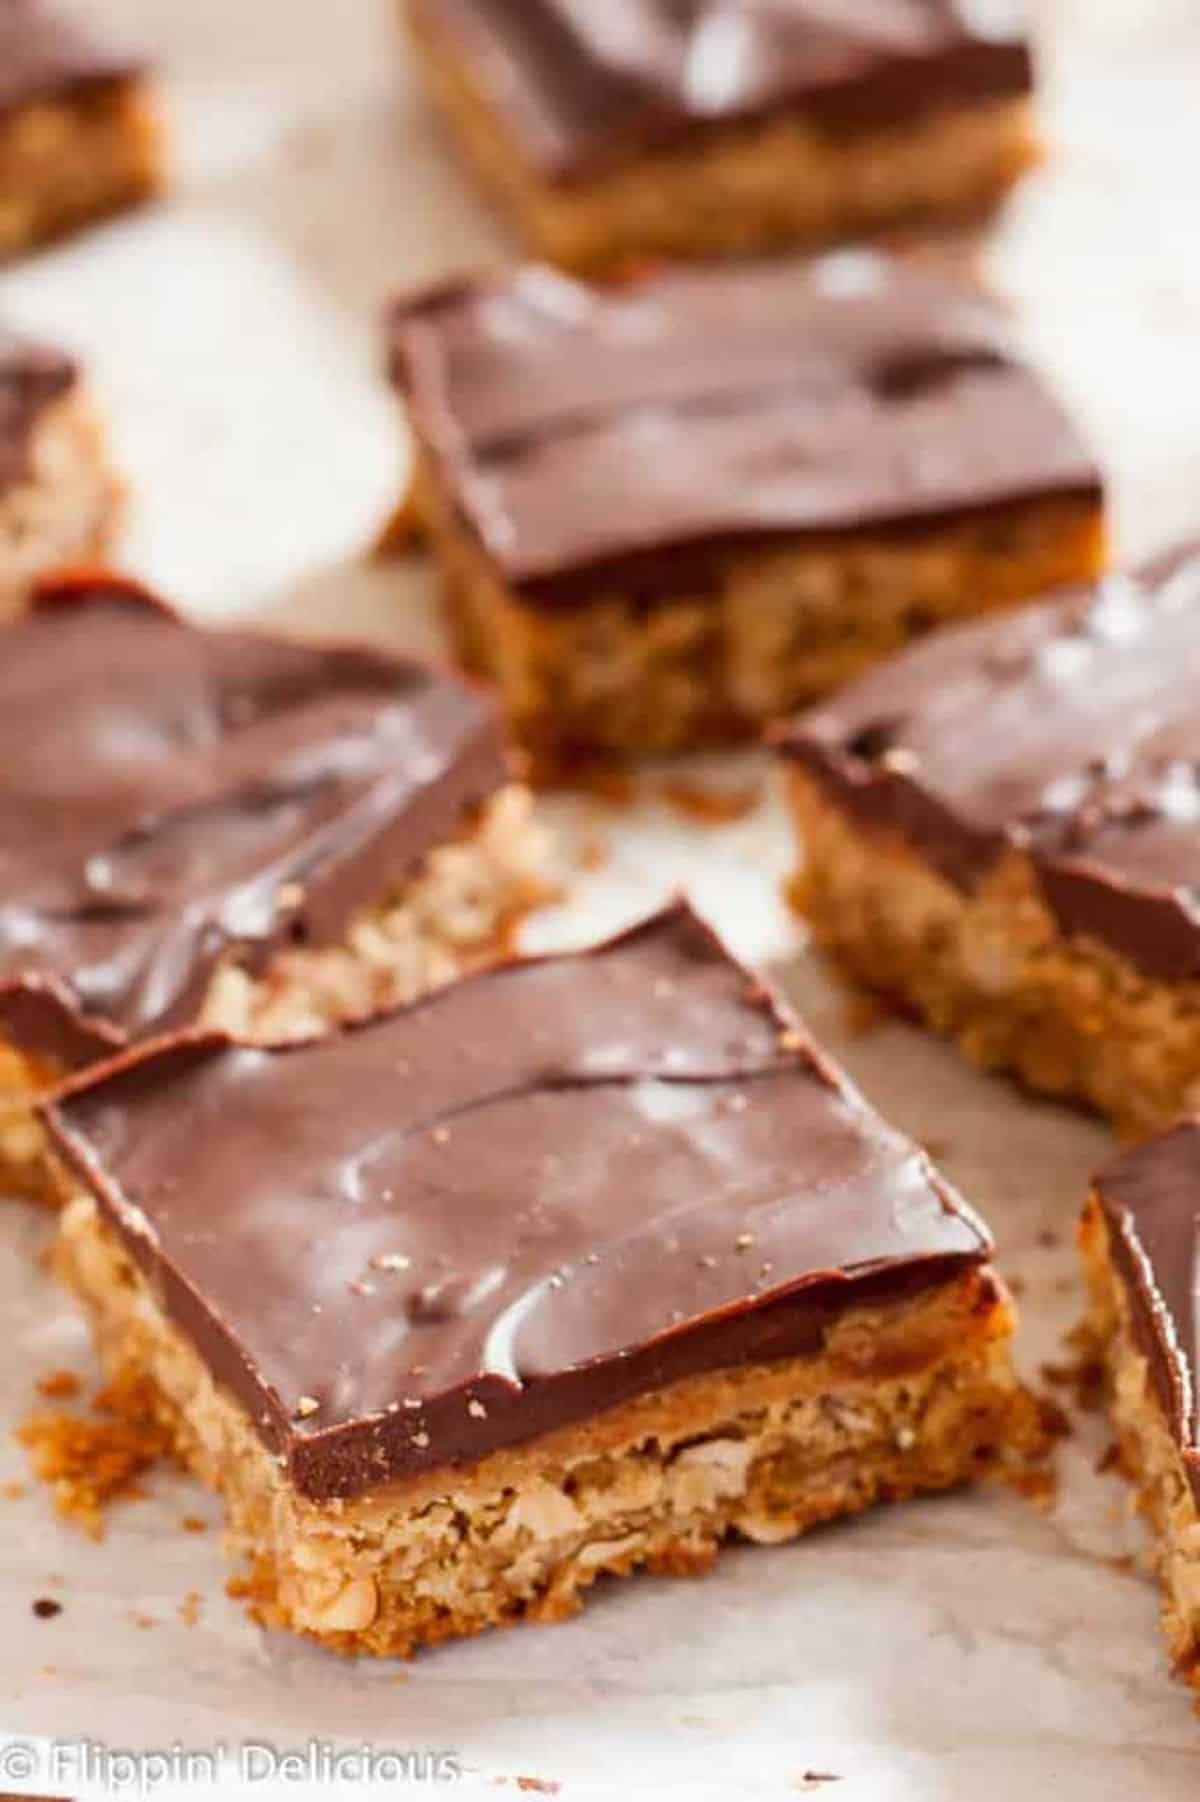 Scrumptious Gluten-Free Peanut Butter Bars with Chocolate Ganache on a table.